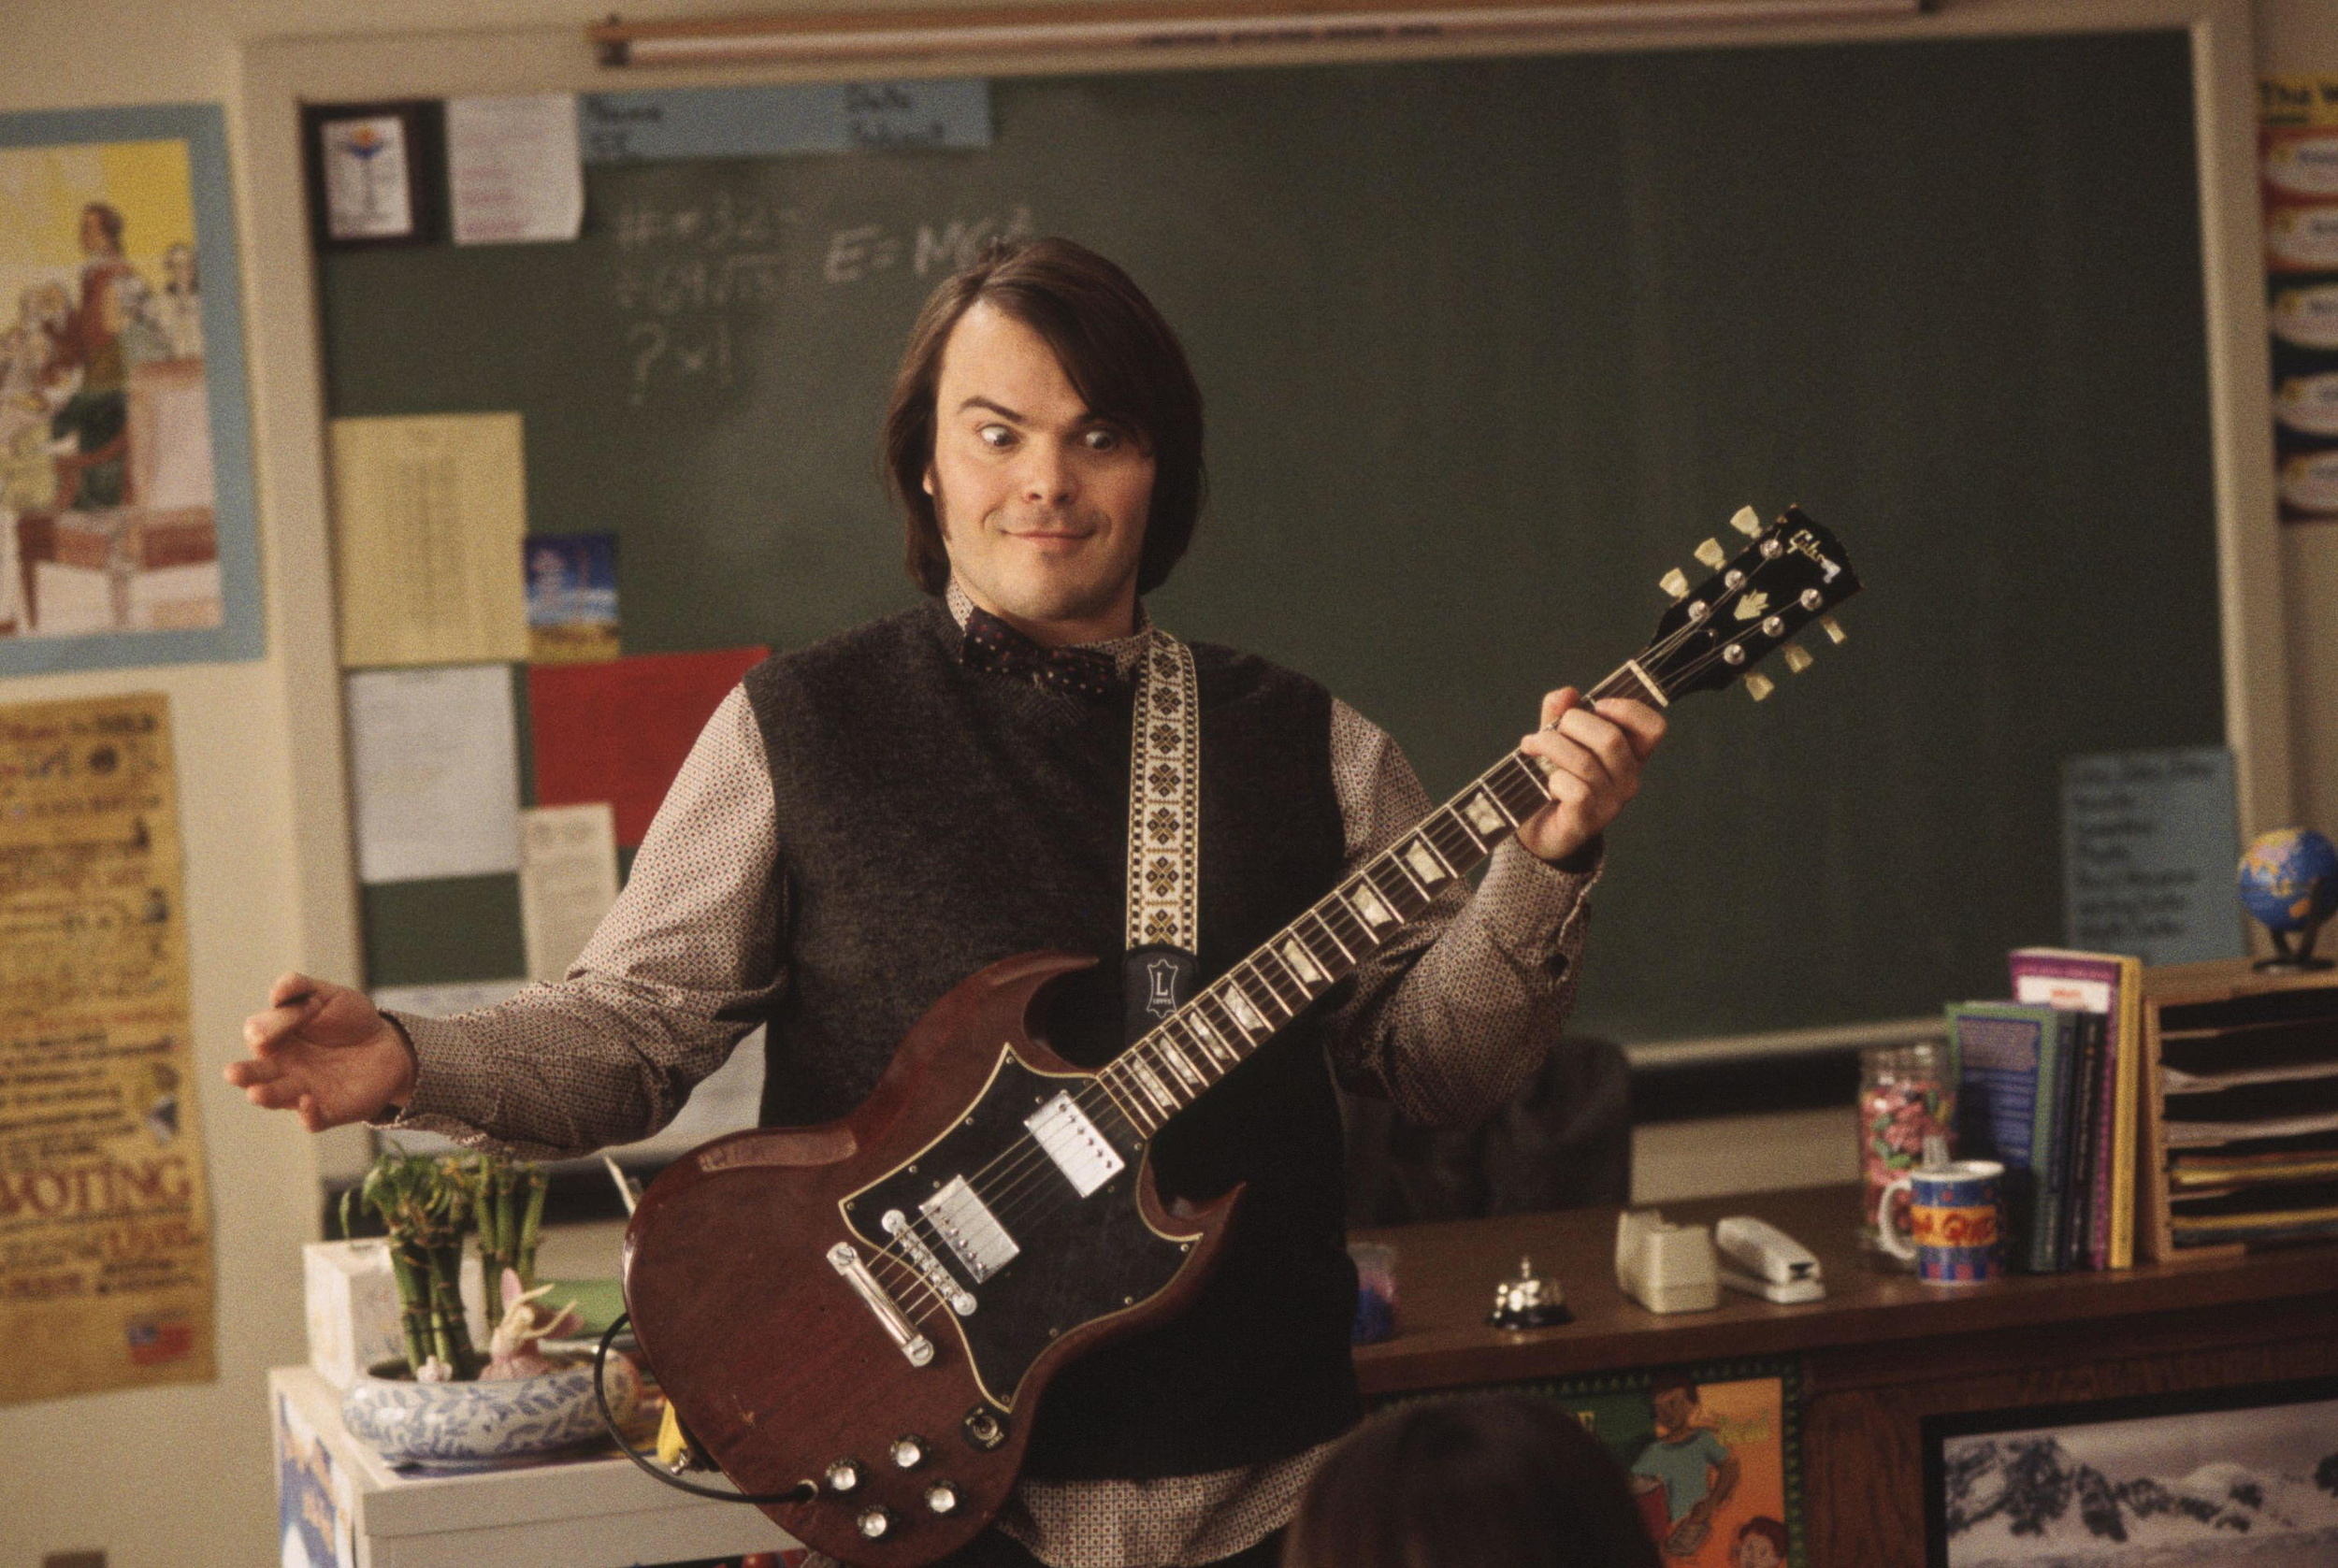 <p>In this movie, Black plays a musician with a love of classic rock. White actually had no interest in that style of music. He wrote the film with Black in mind for the lead role and catered it to Black’s own history performing rock music as one-half of Tenacious D.</p>